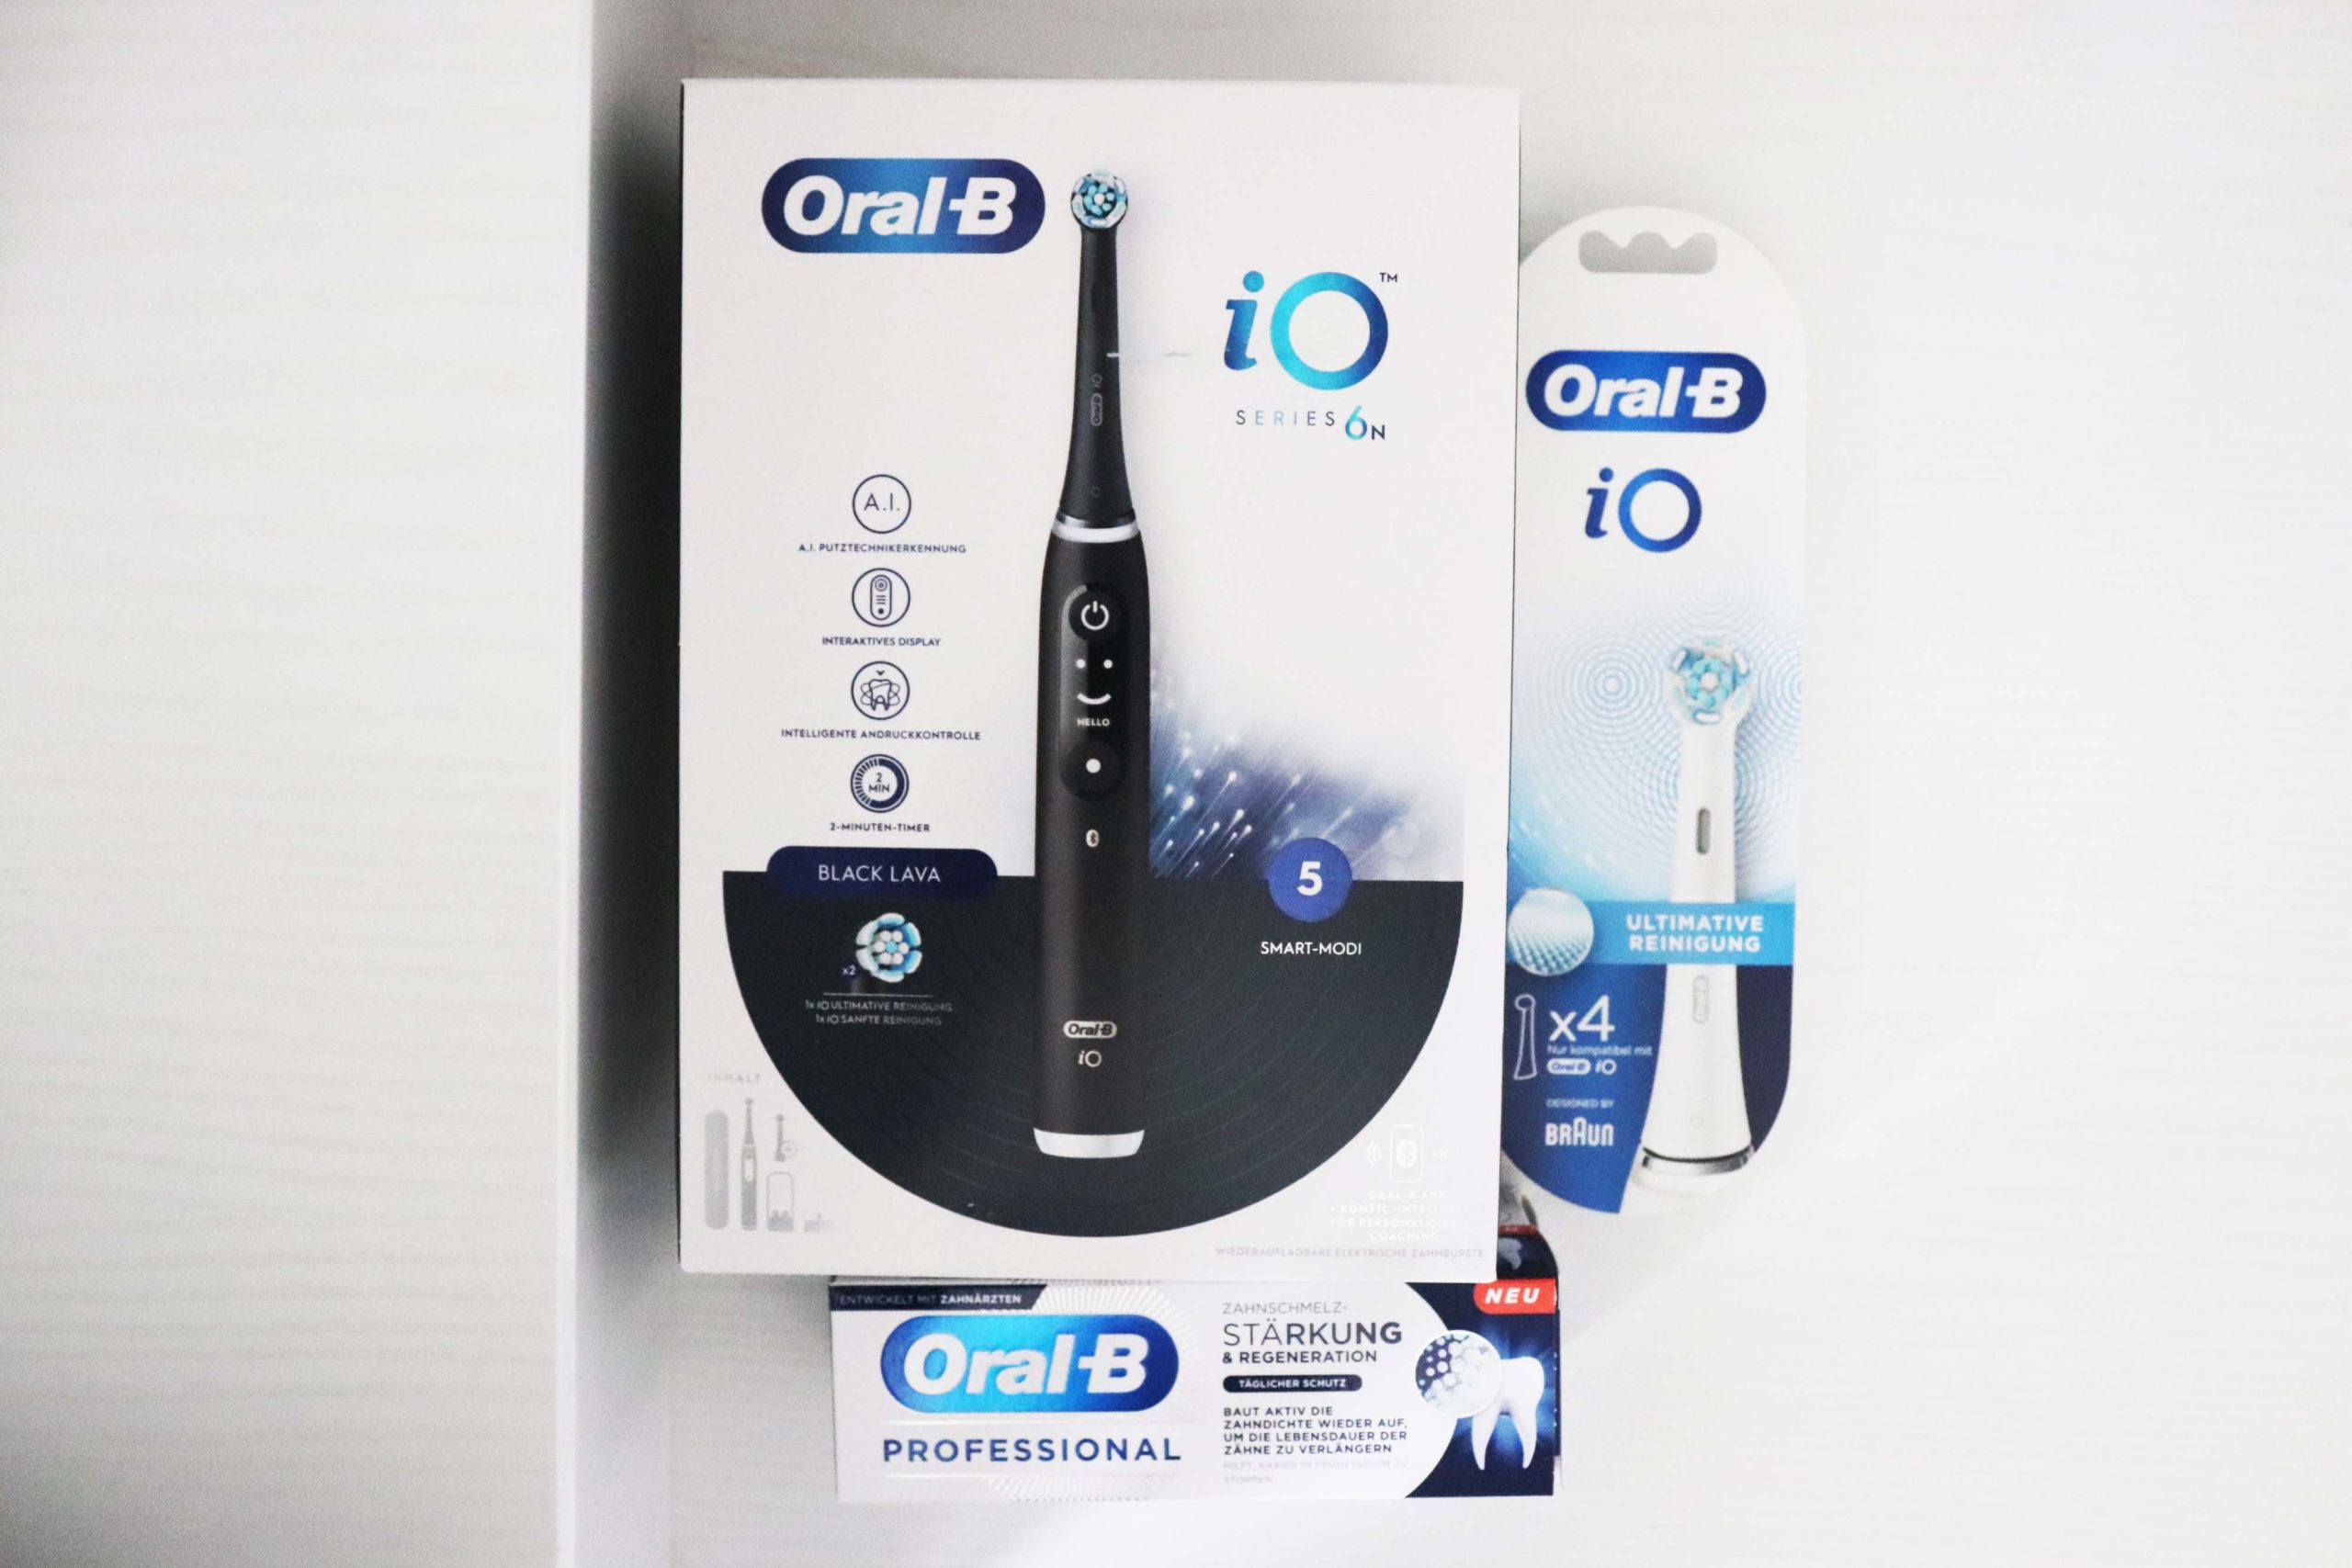 Oral-B iO Series 6 competition